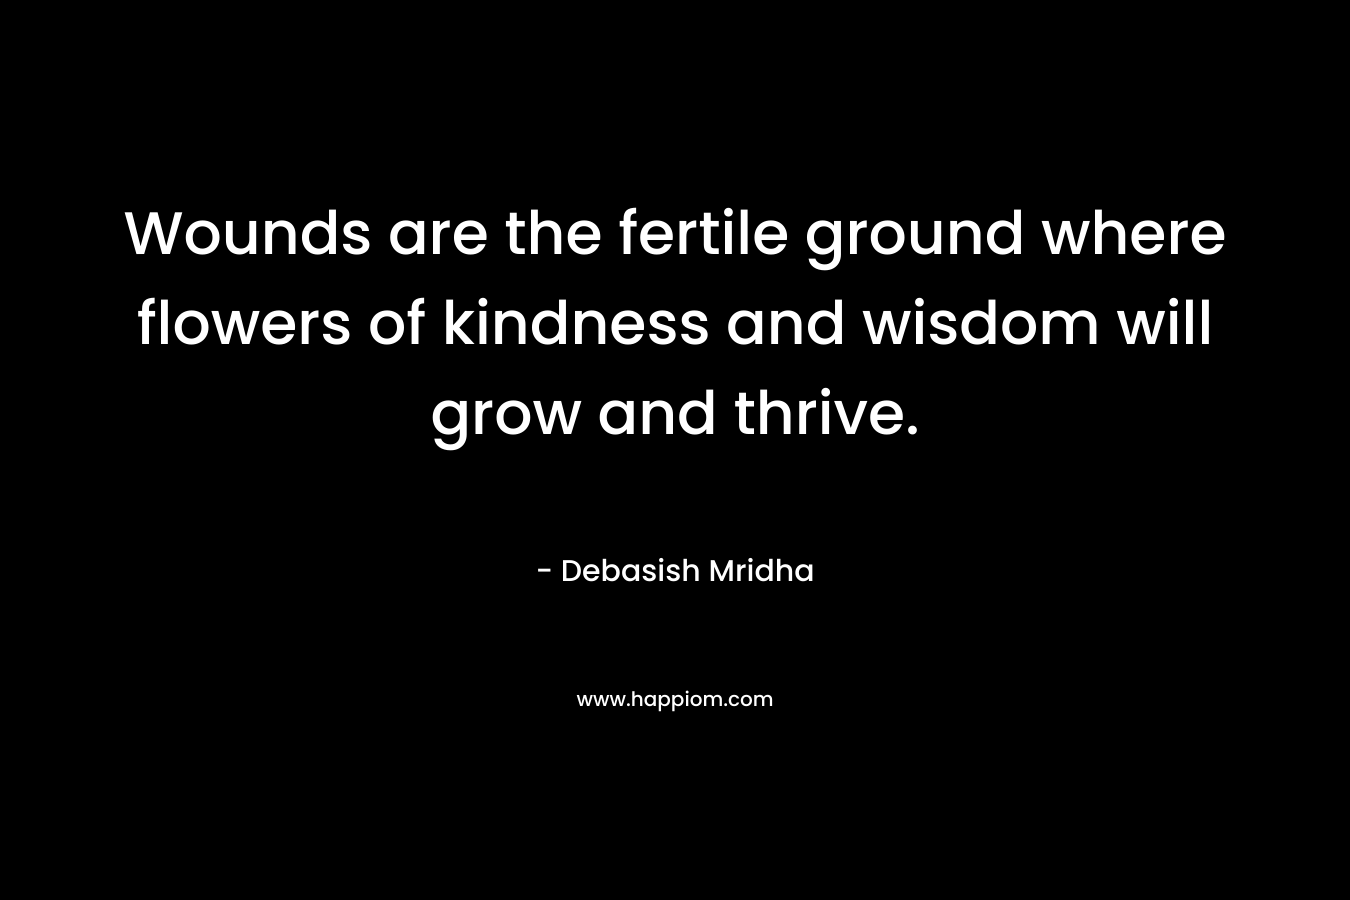 Wounds are the fertile ground where flowers of kindness and wisdom will grow and thrive. – Debasish Mridha